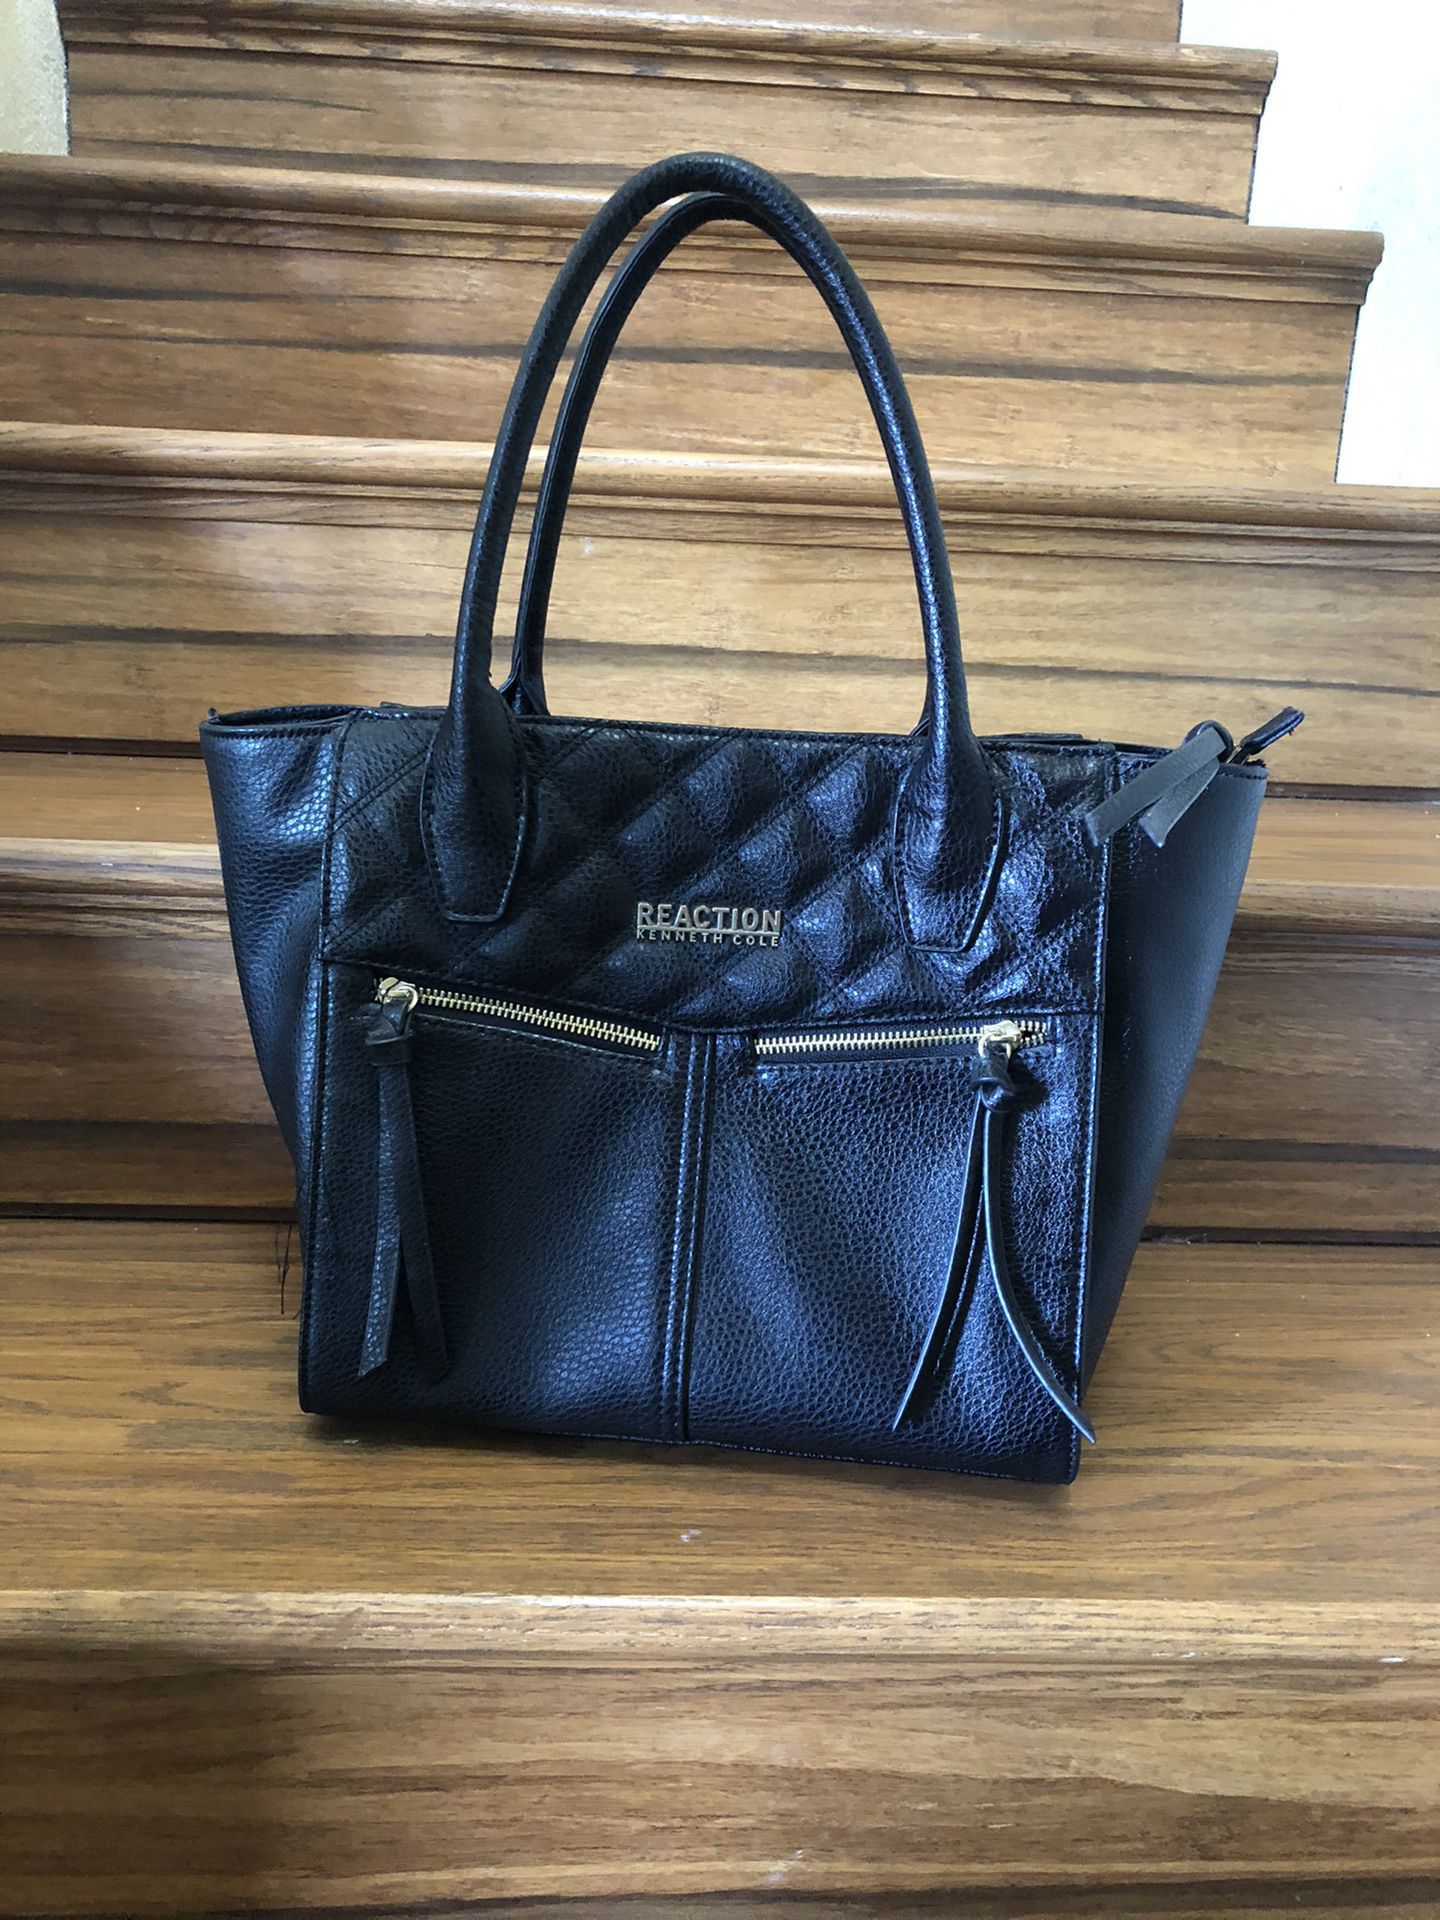 Kennet cole and handbag tote bag women’s new condition